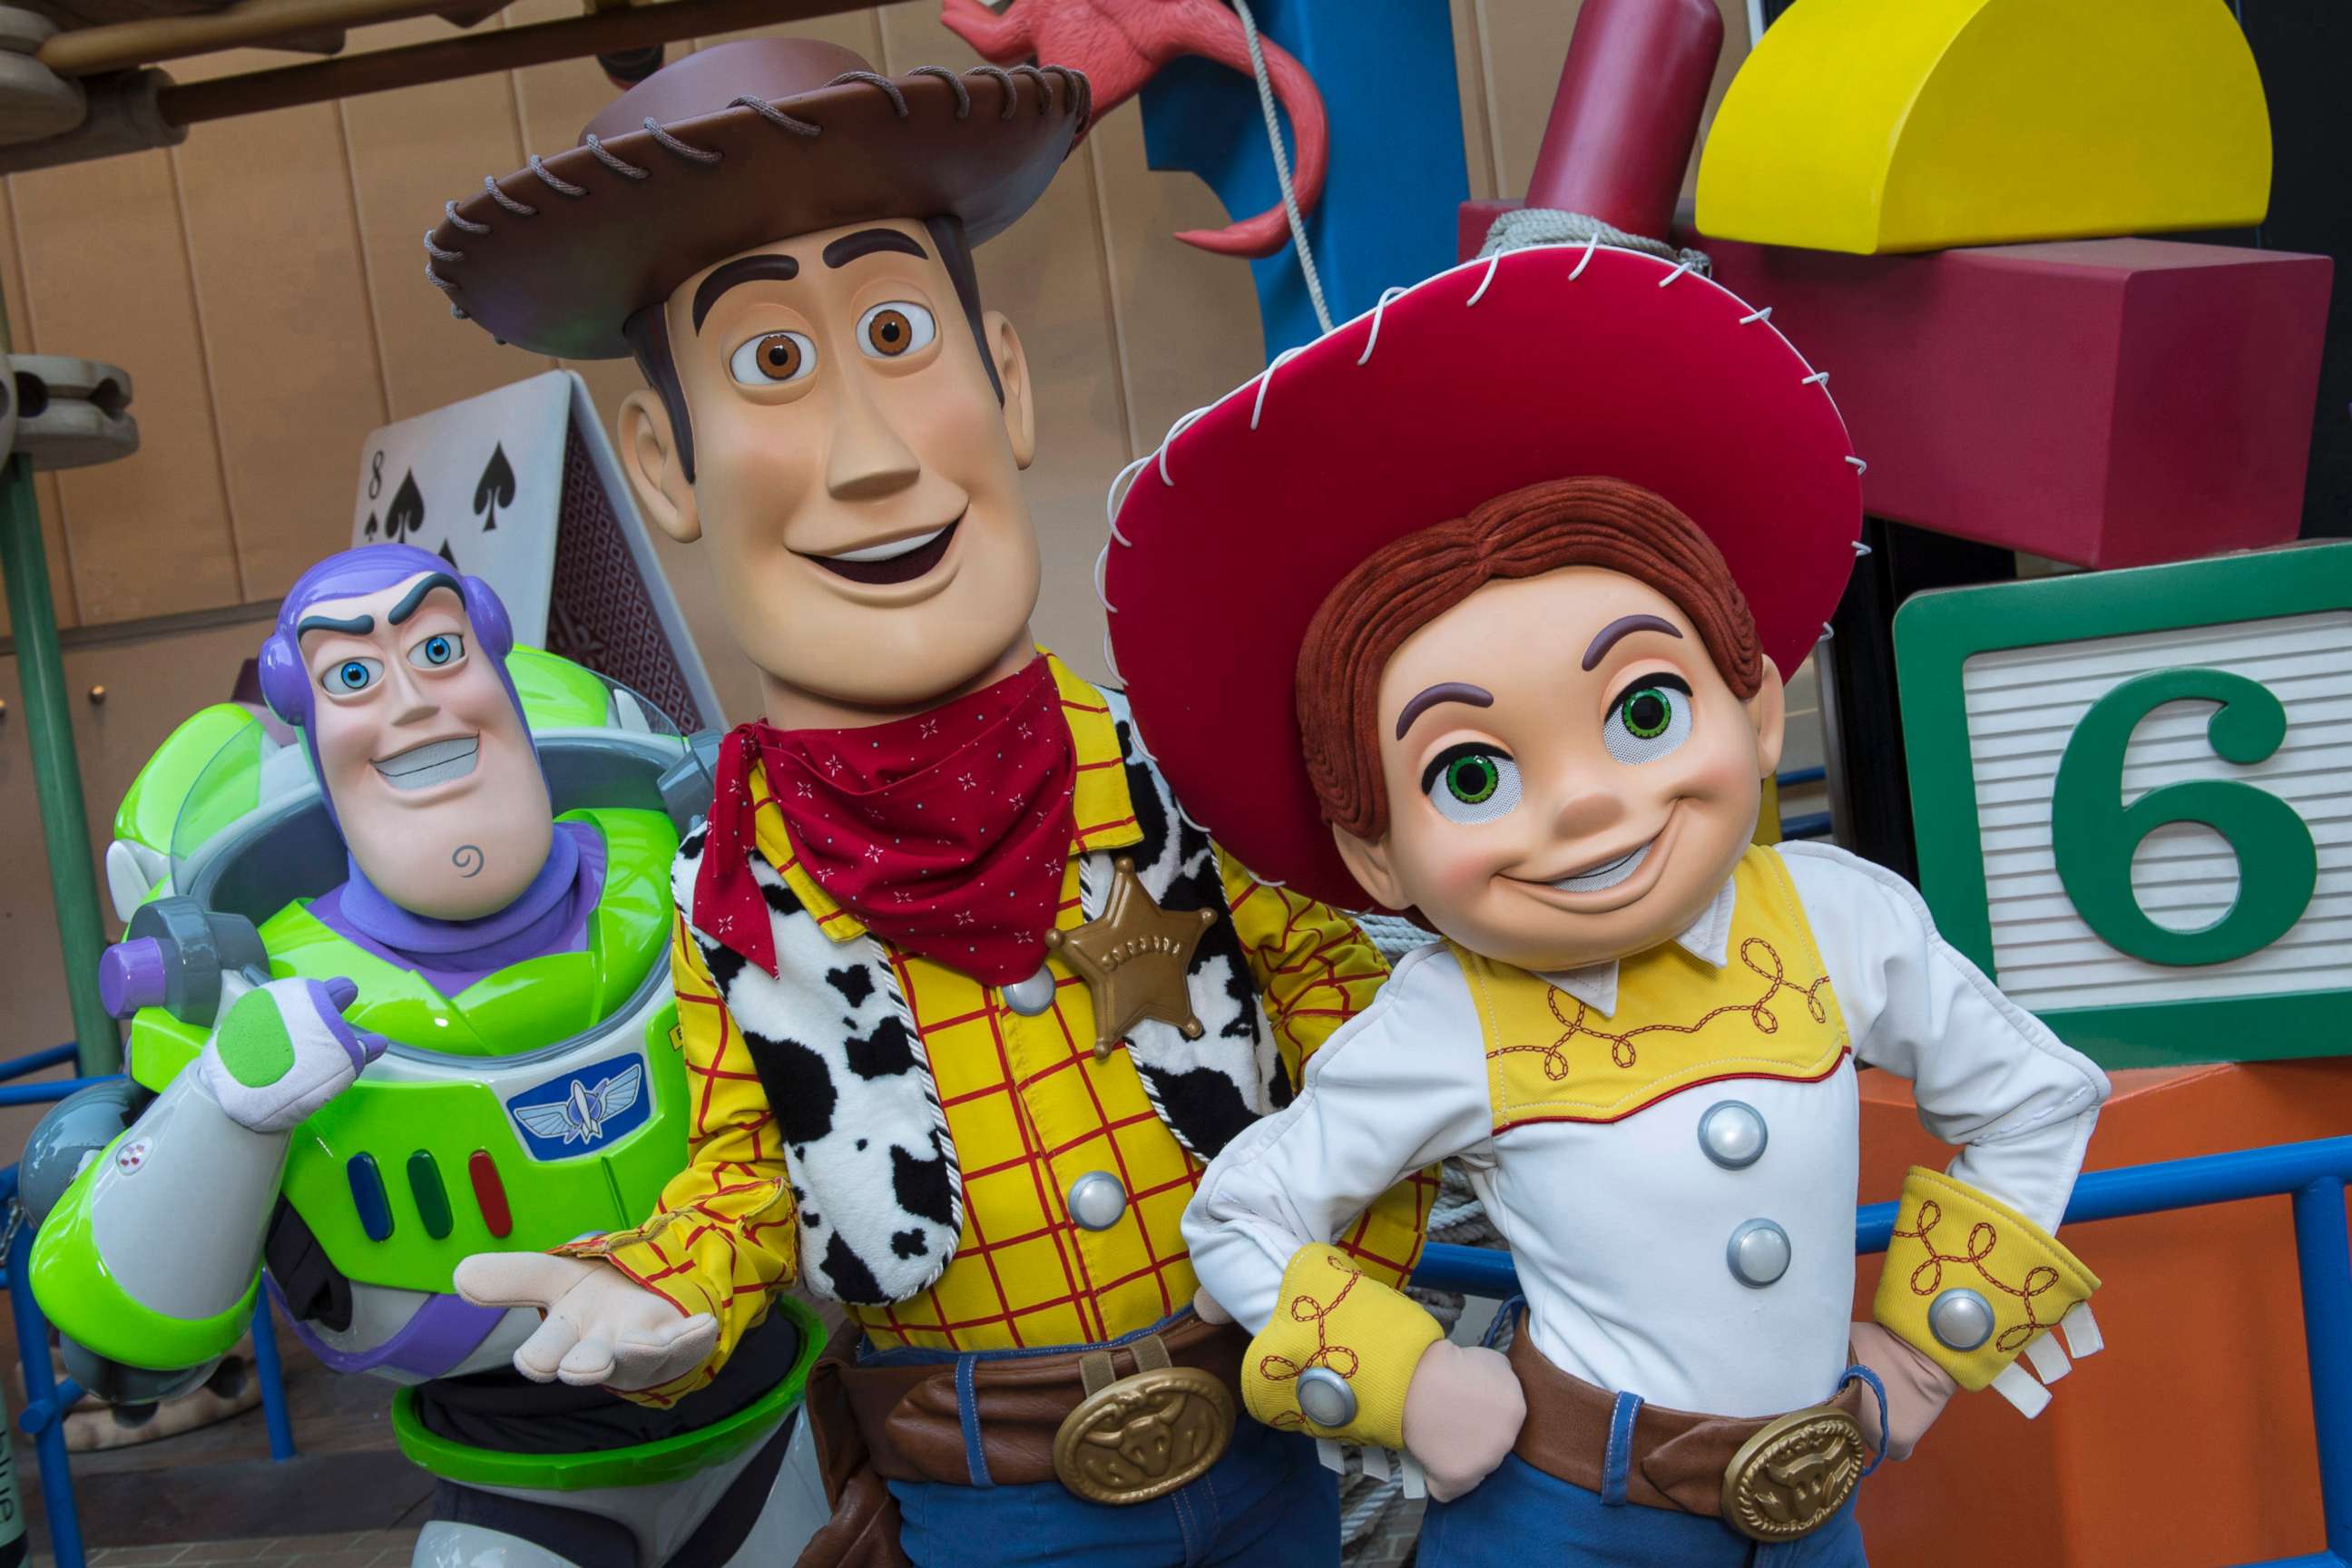 PHOTO: GMA gets an inside look at Toy Story Land, which will open at Walt Disney World June 30, 2018.